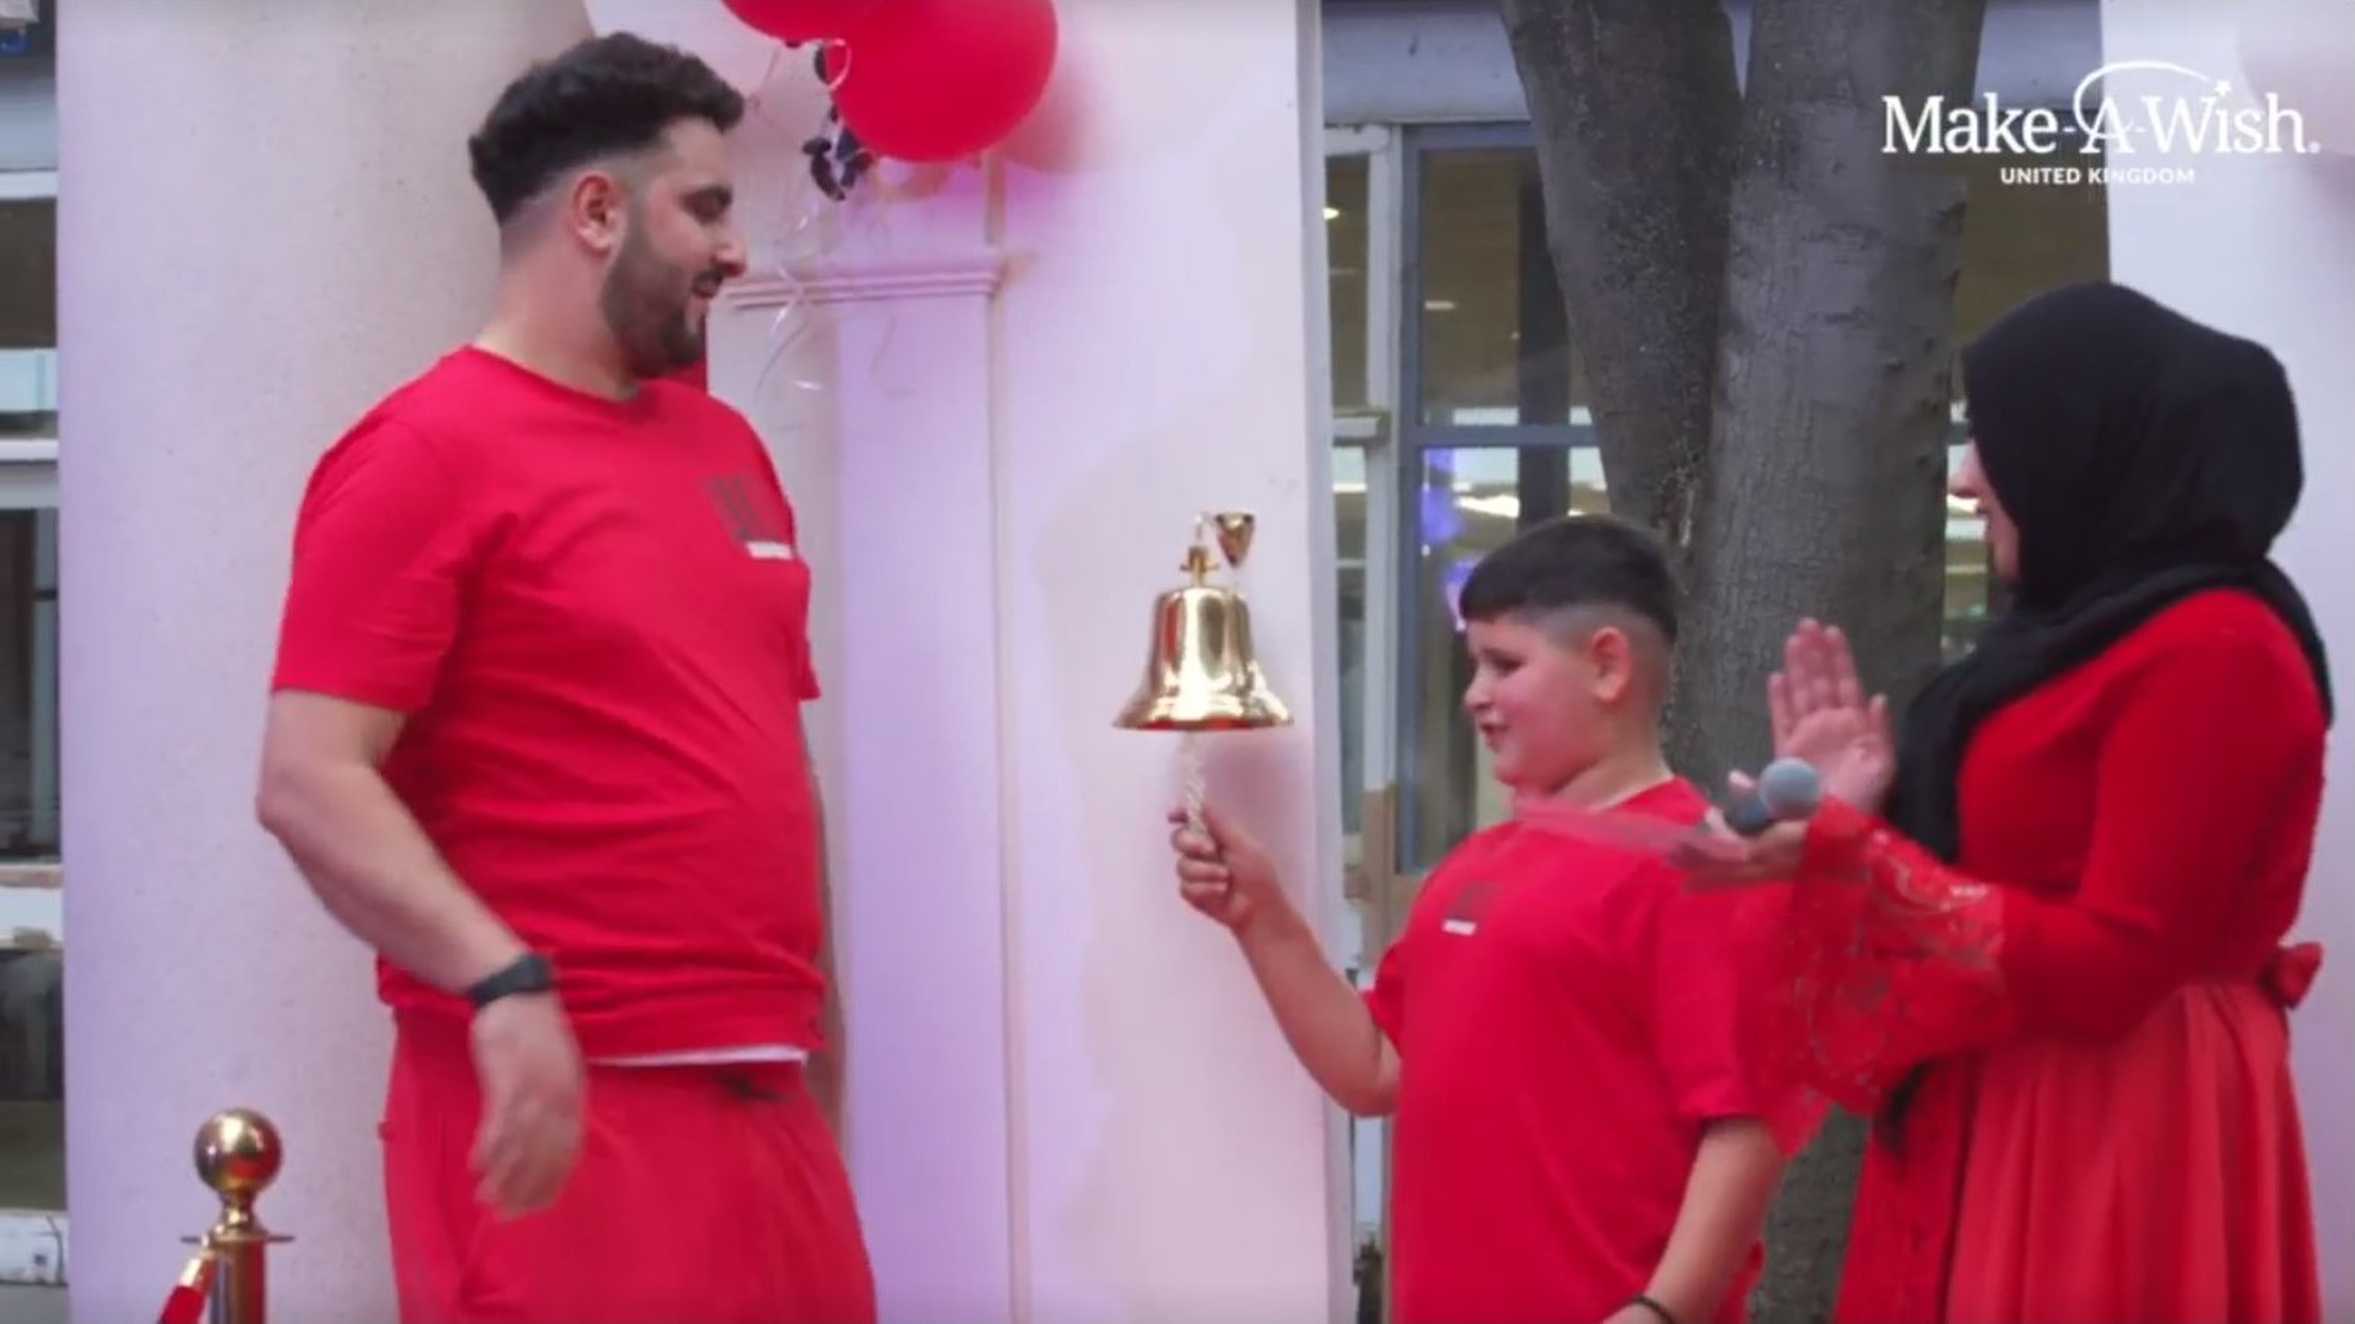 Adil ringing the bell to signify the end of his treatment.